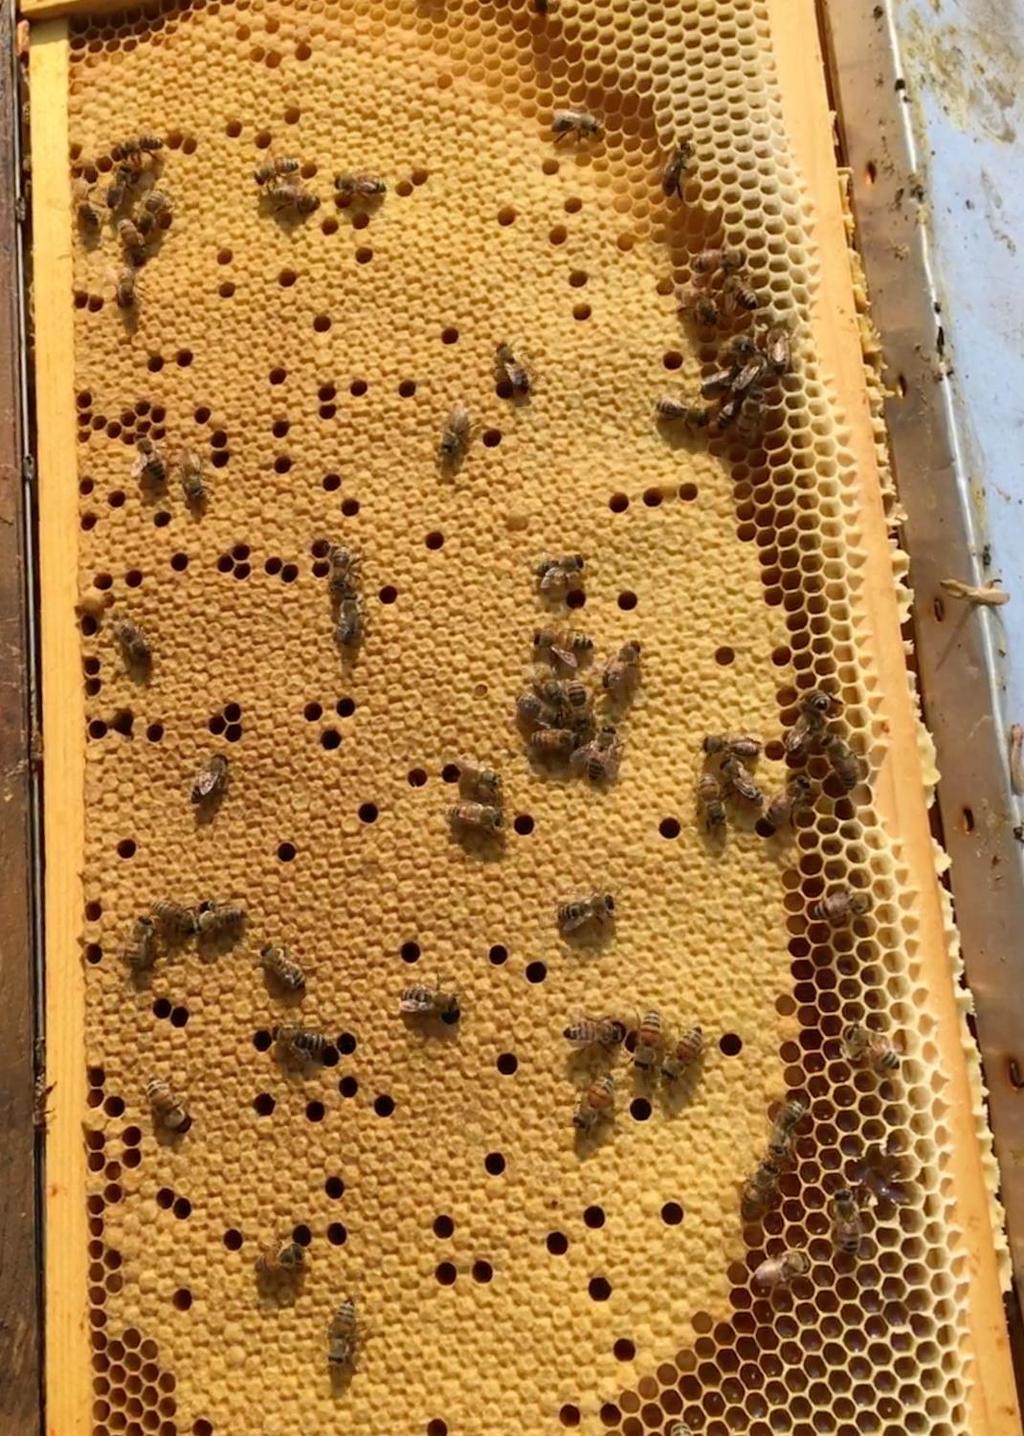 epidemic! I often hear a beekeeper say they lost their biggest colony. They do not seem to understand big colonies can have huge mite populations.